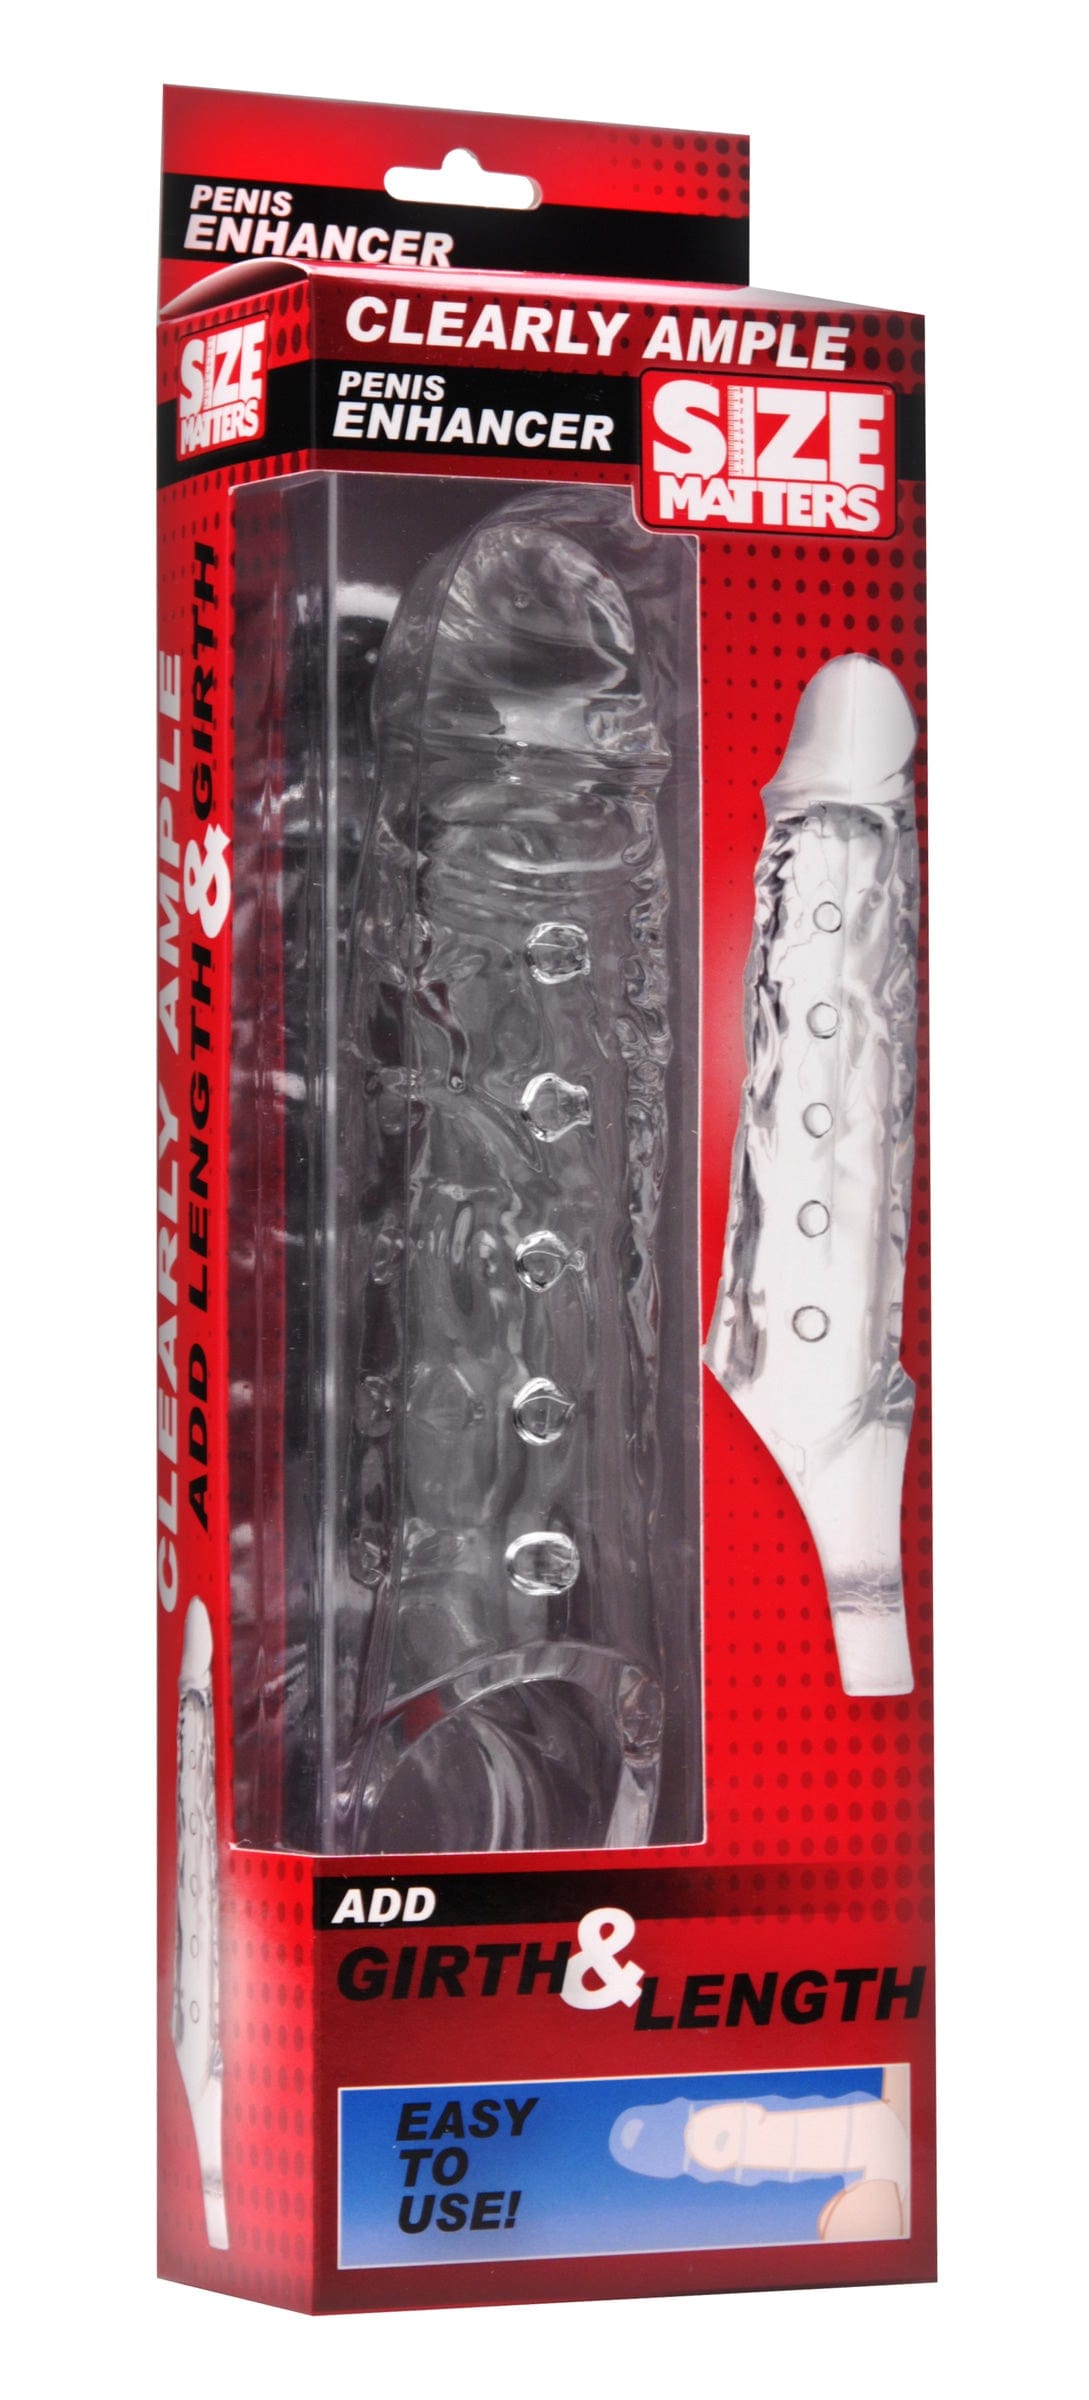 Size Matters Adult Toys Clear Clearly Ample Penis Enhancer Sheath 848518007339